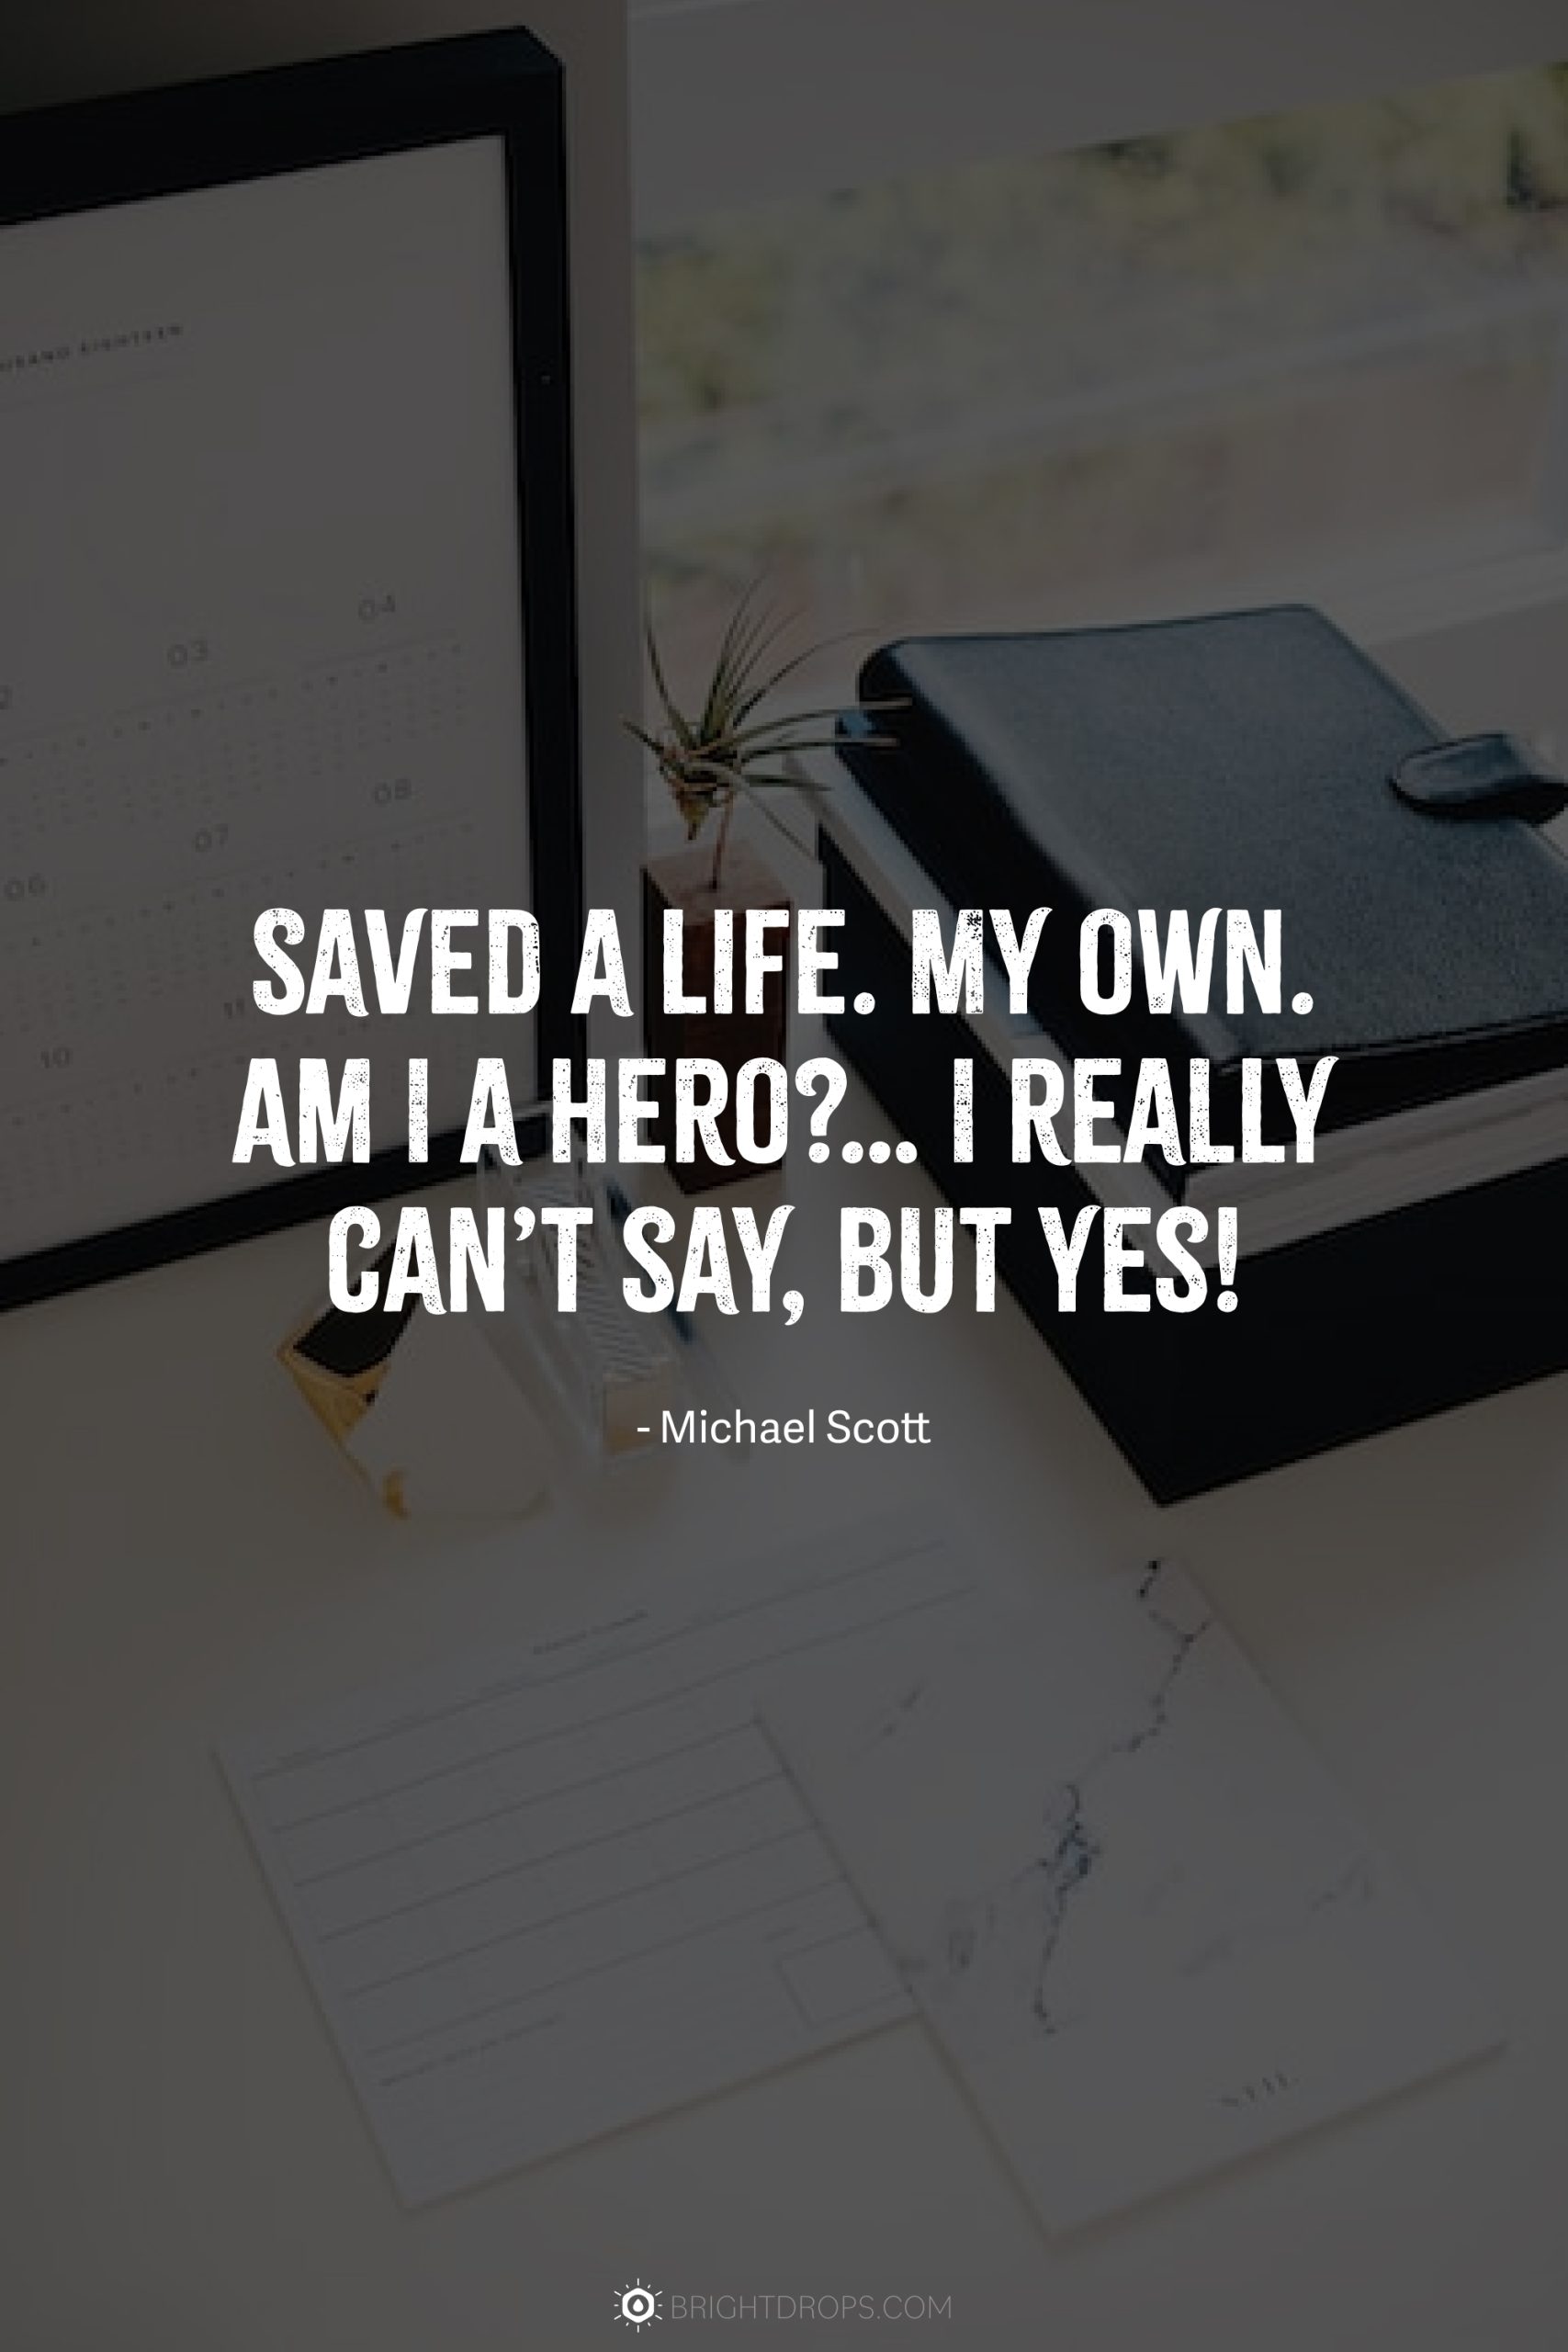 Saved a life. My own. Am I a hero?… I really can’t say, but yes!